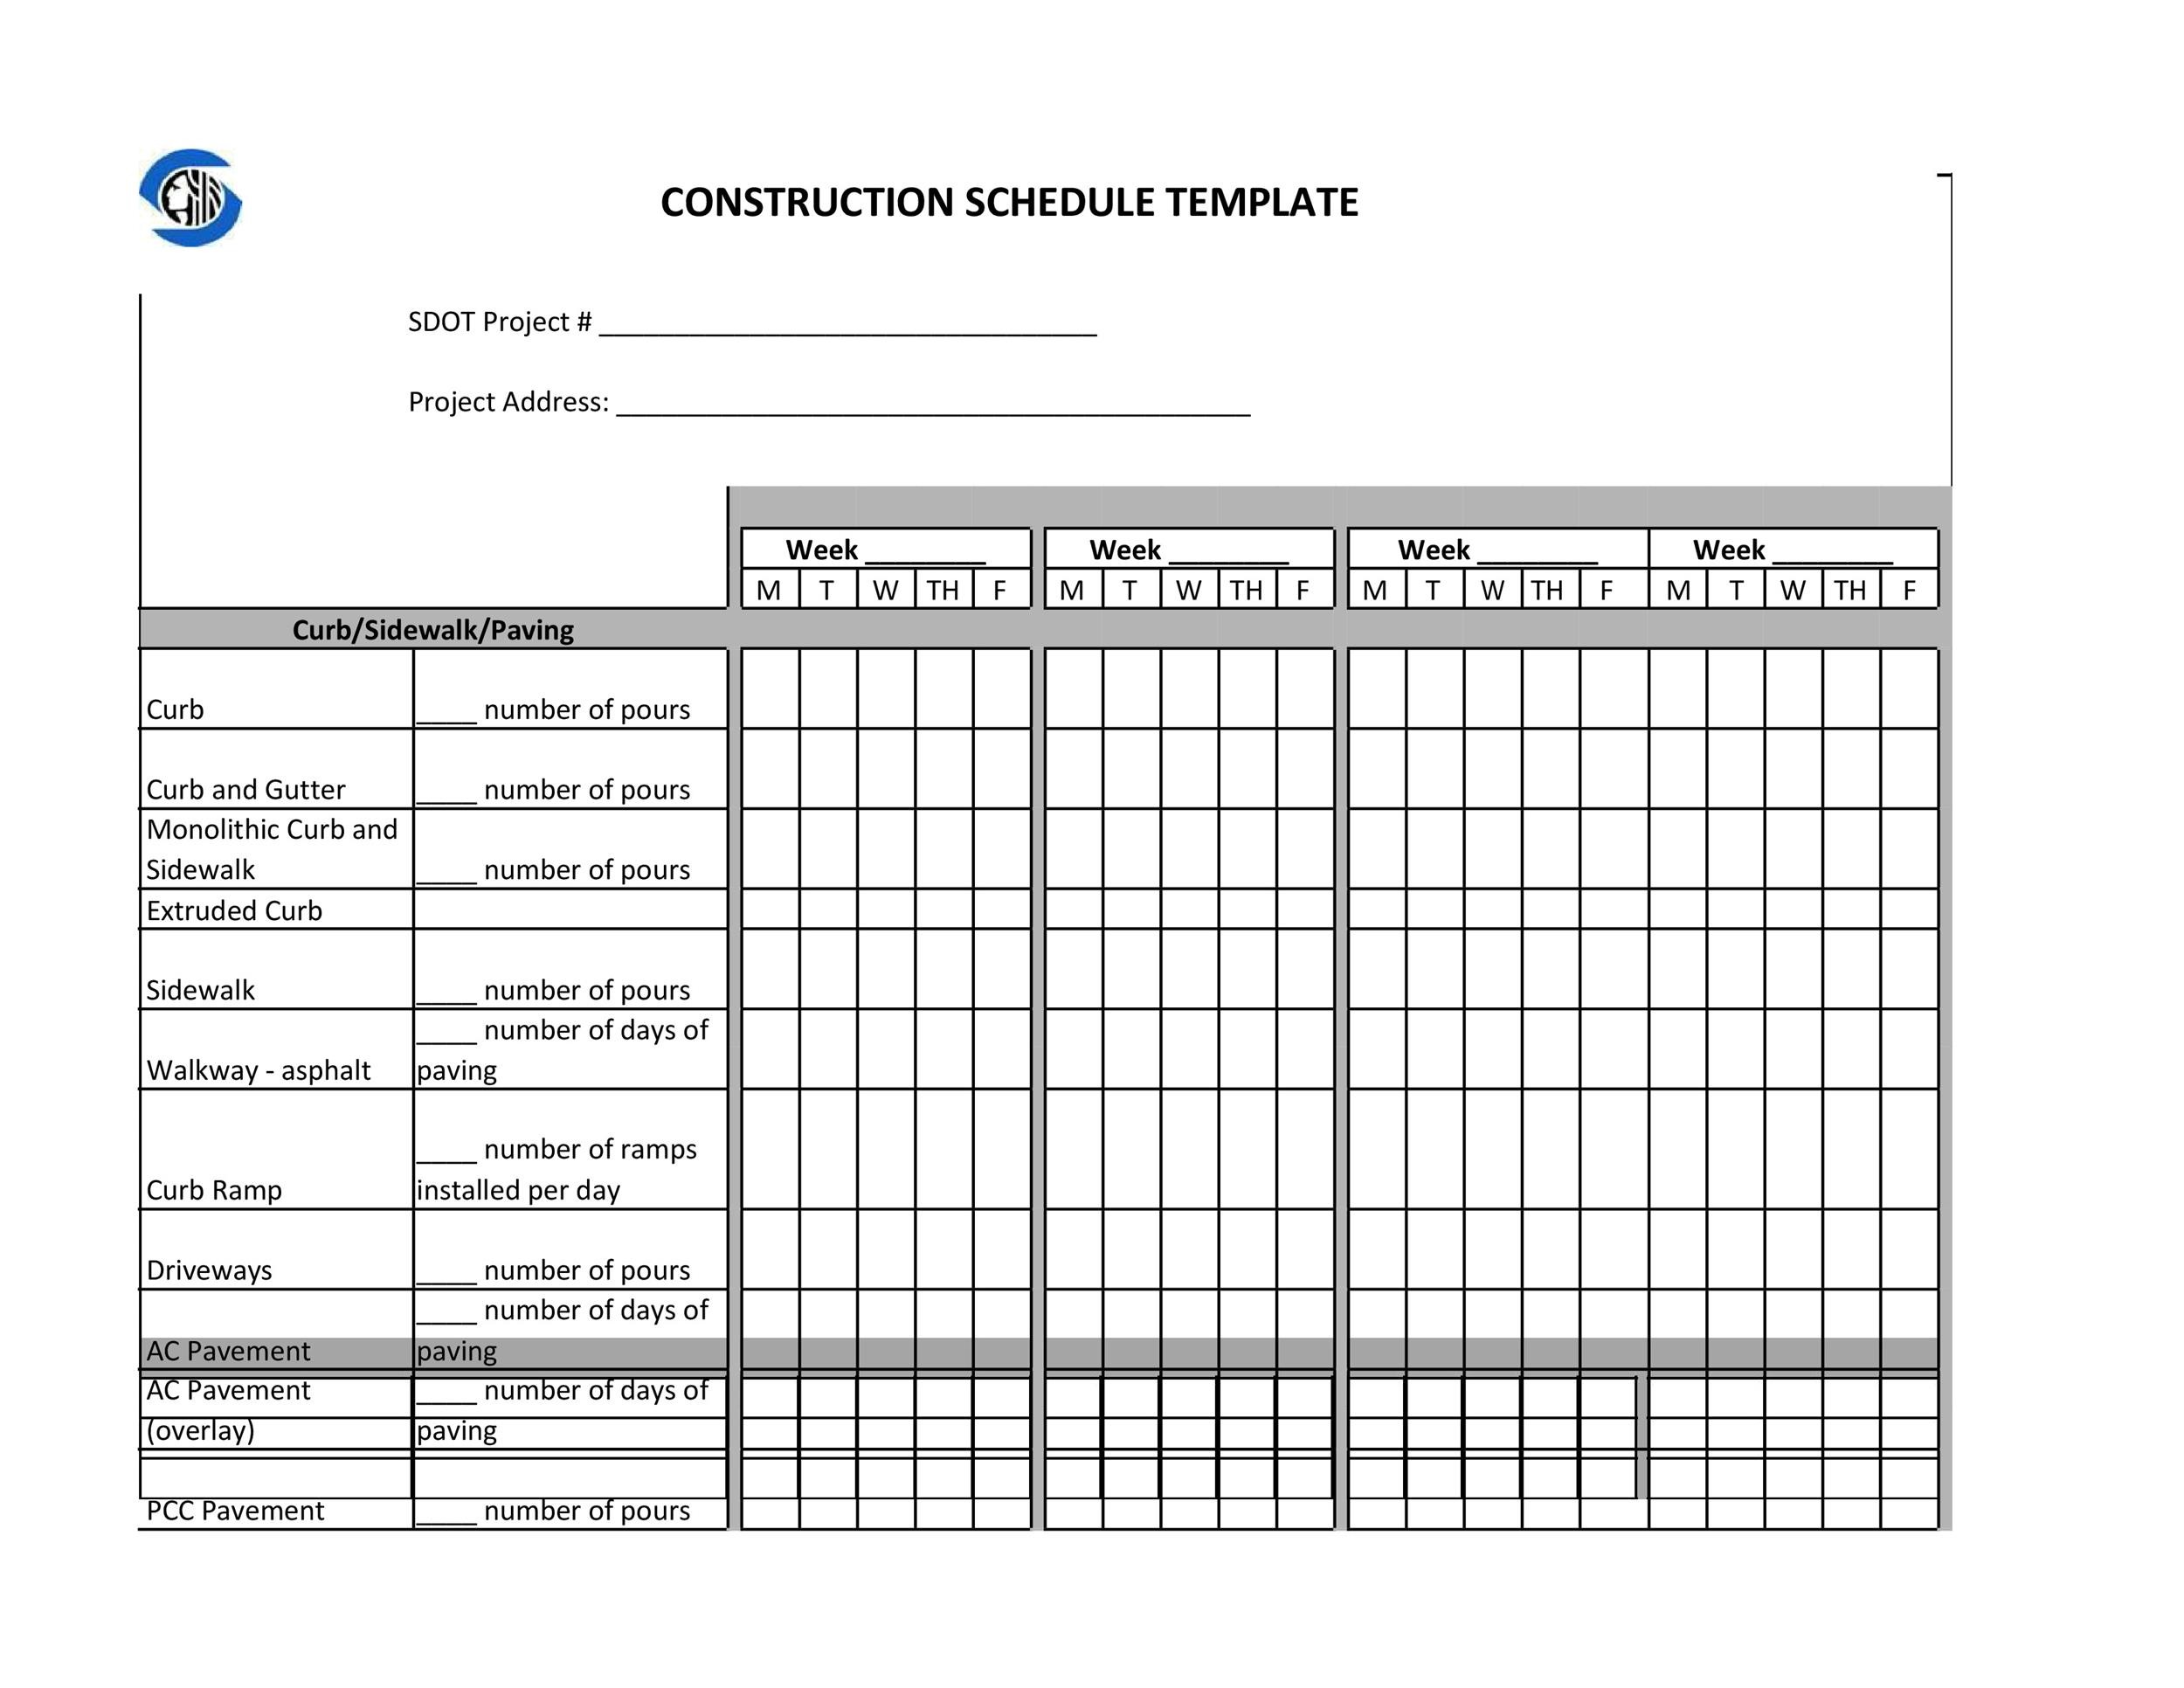 21 Construction Schedule Templates in Word Excel ᐅ TemplateLab